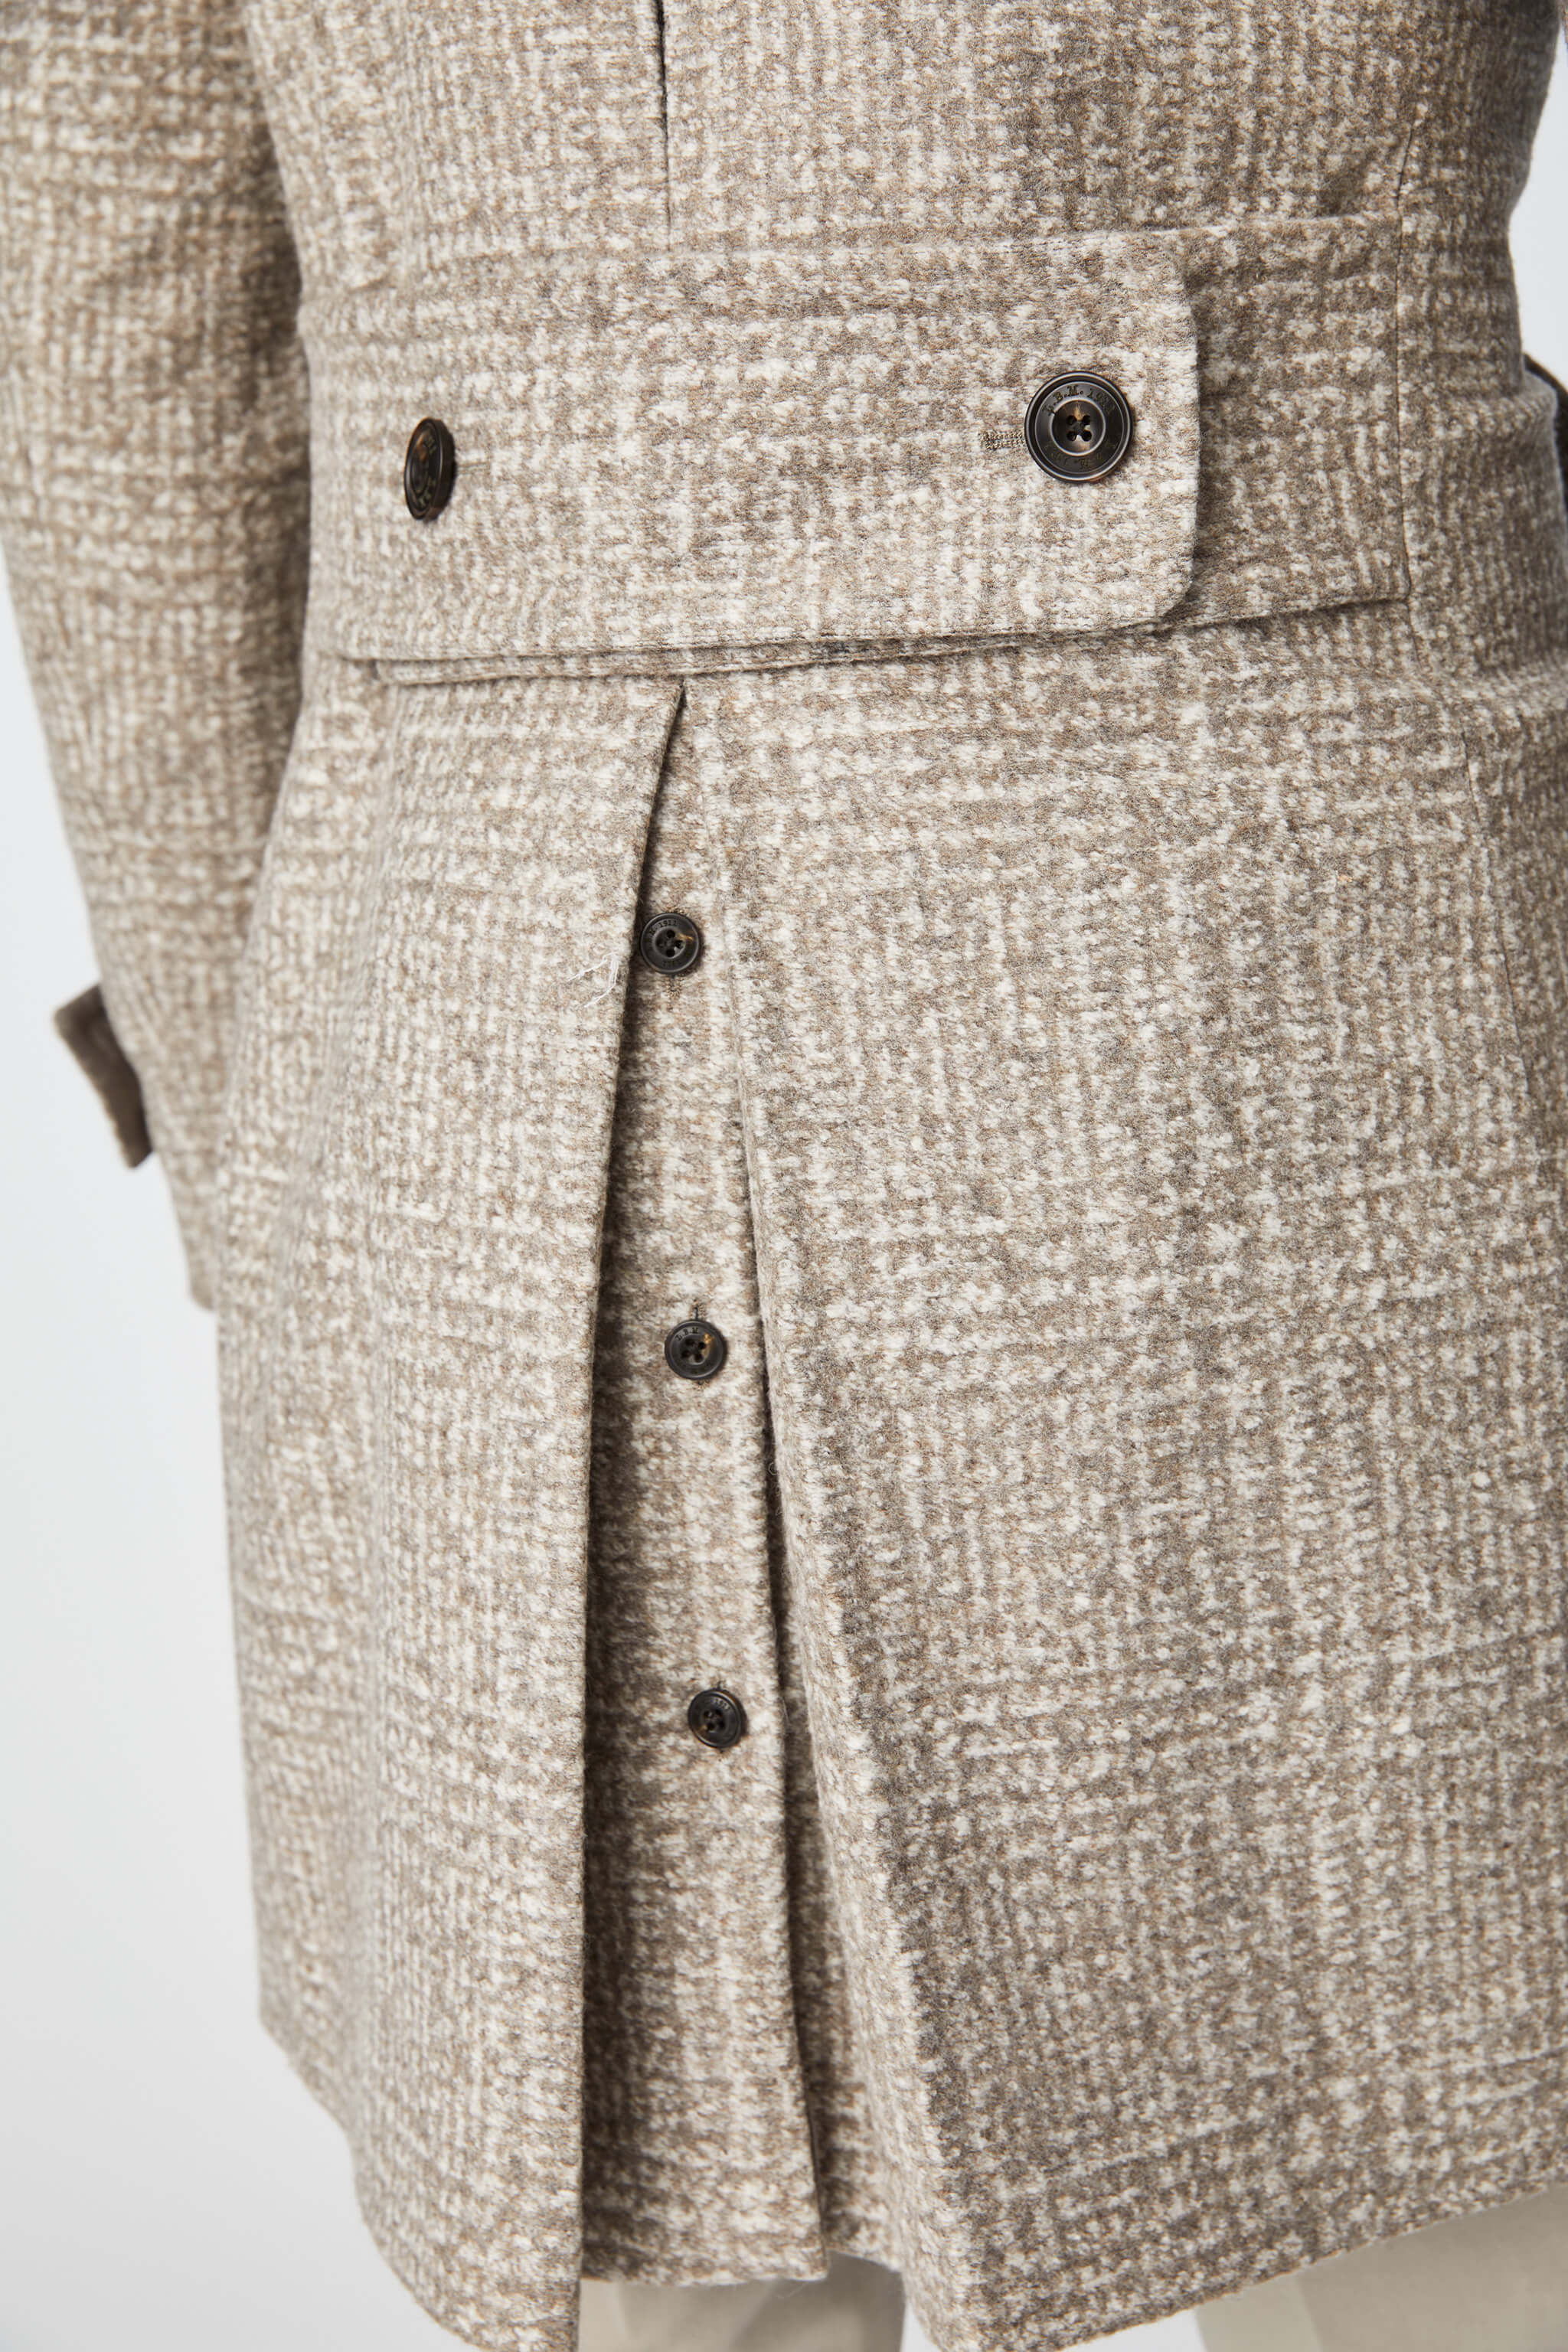 Chesterfield coat in dove gray jersey